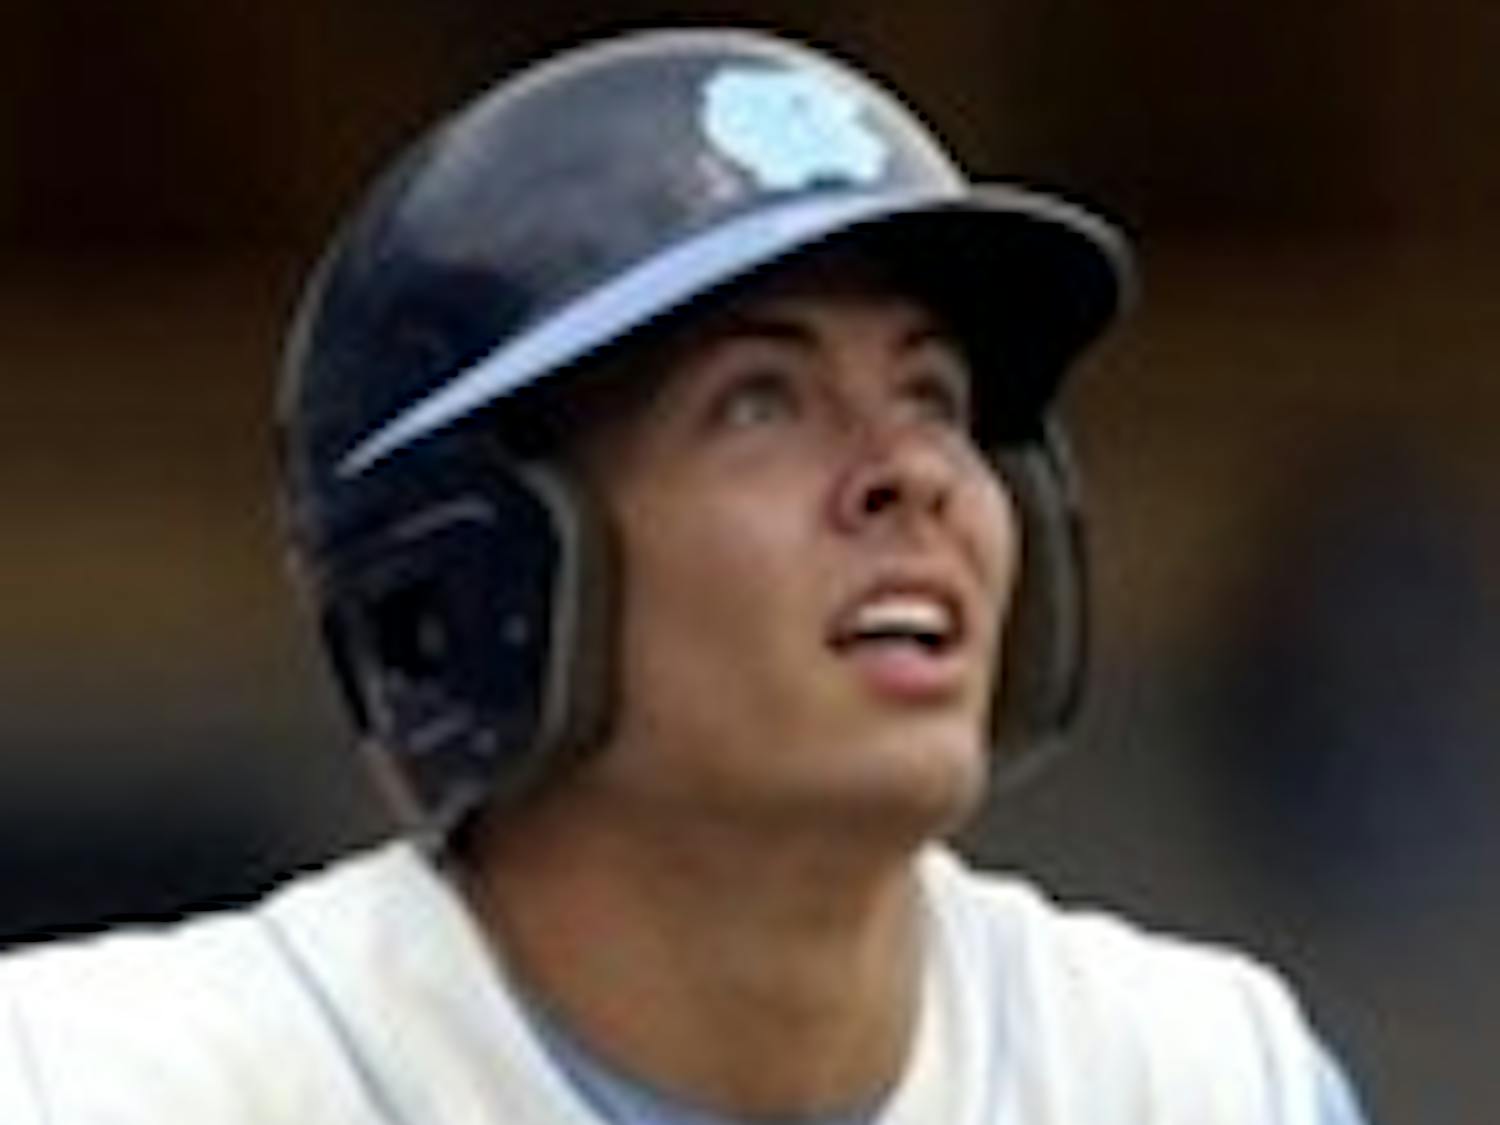 UNC junior pitcher Colin Bates left the mound with a 3-2 lead against Duke, but UNC couldn’t hold it.